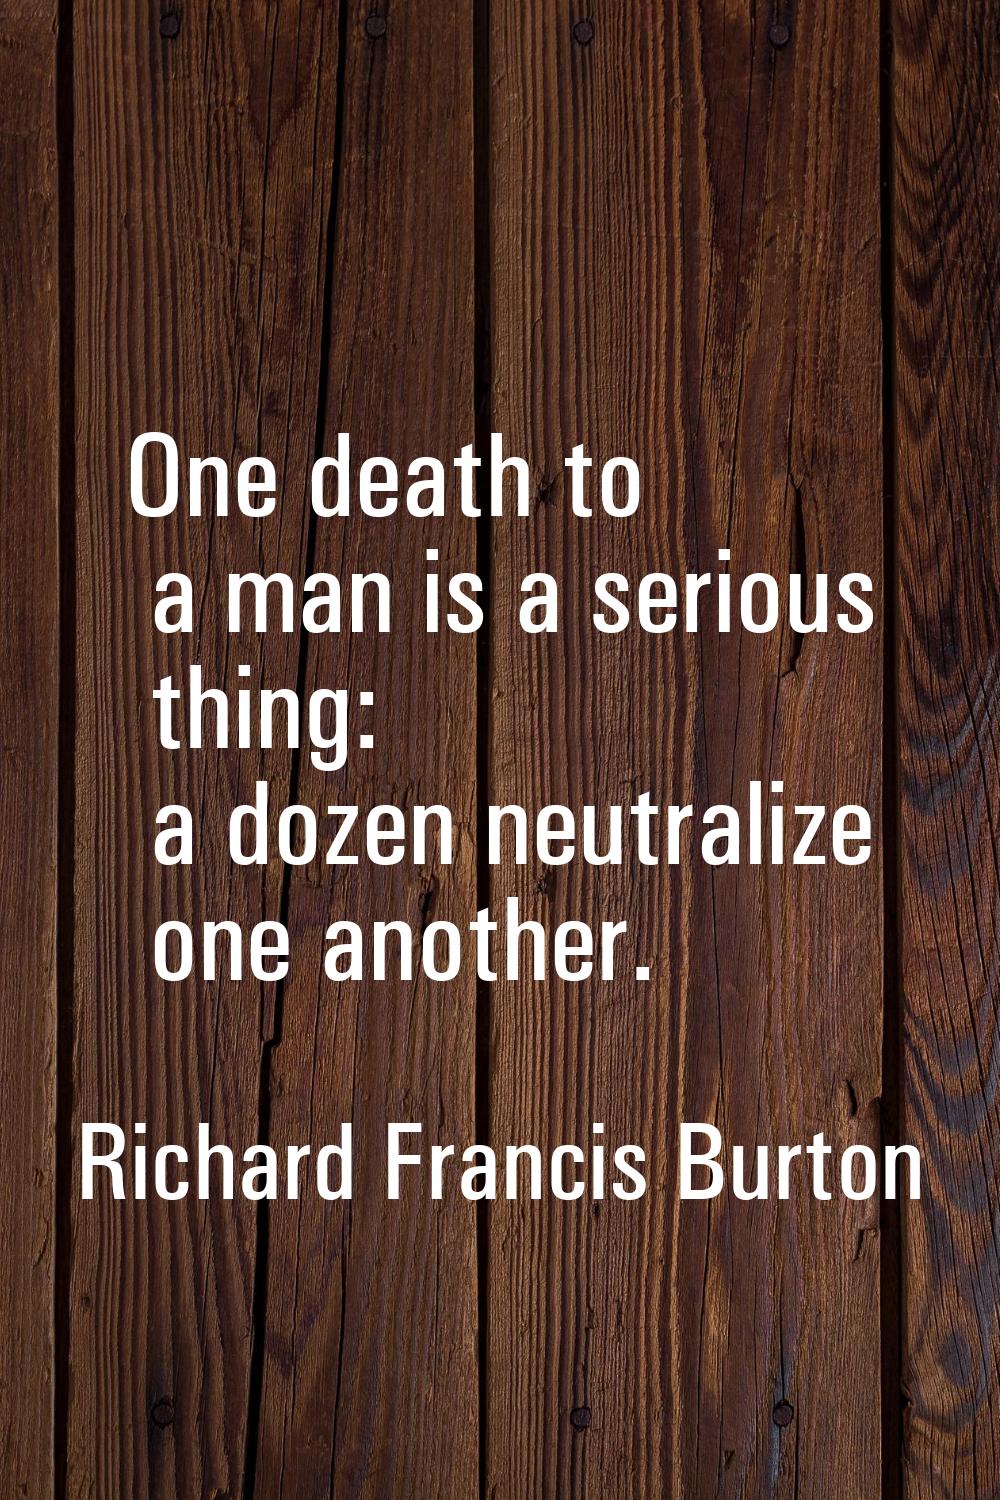 One death to a man is a serious thing: a dozen neutralize one another.